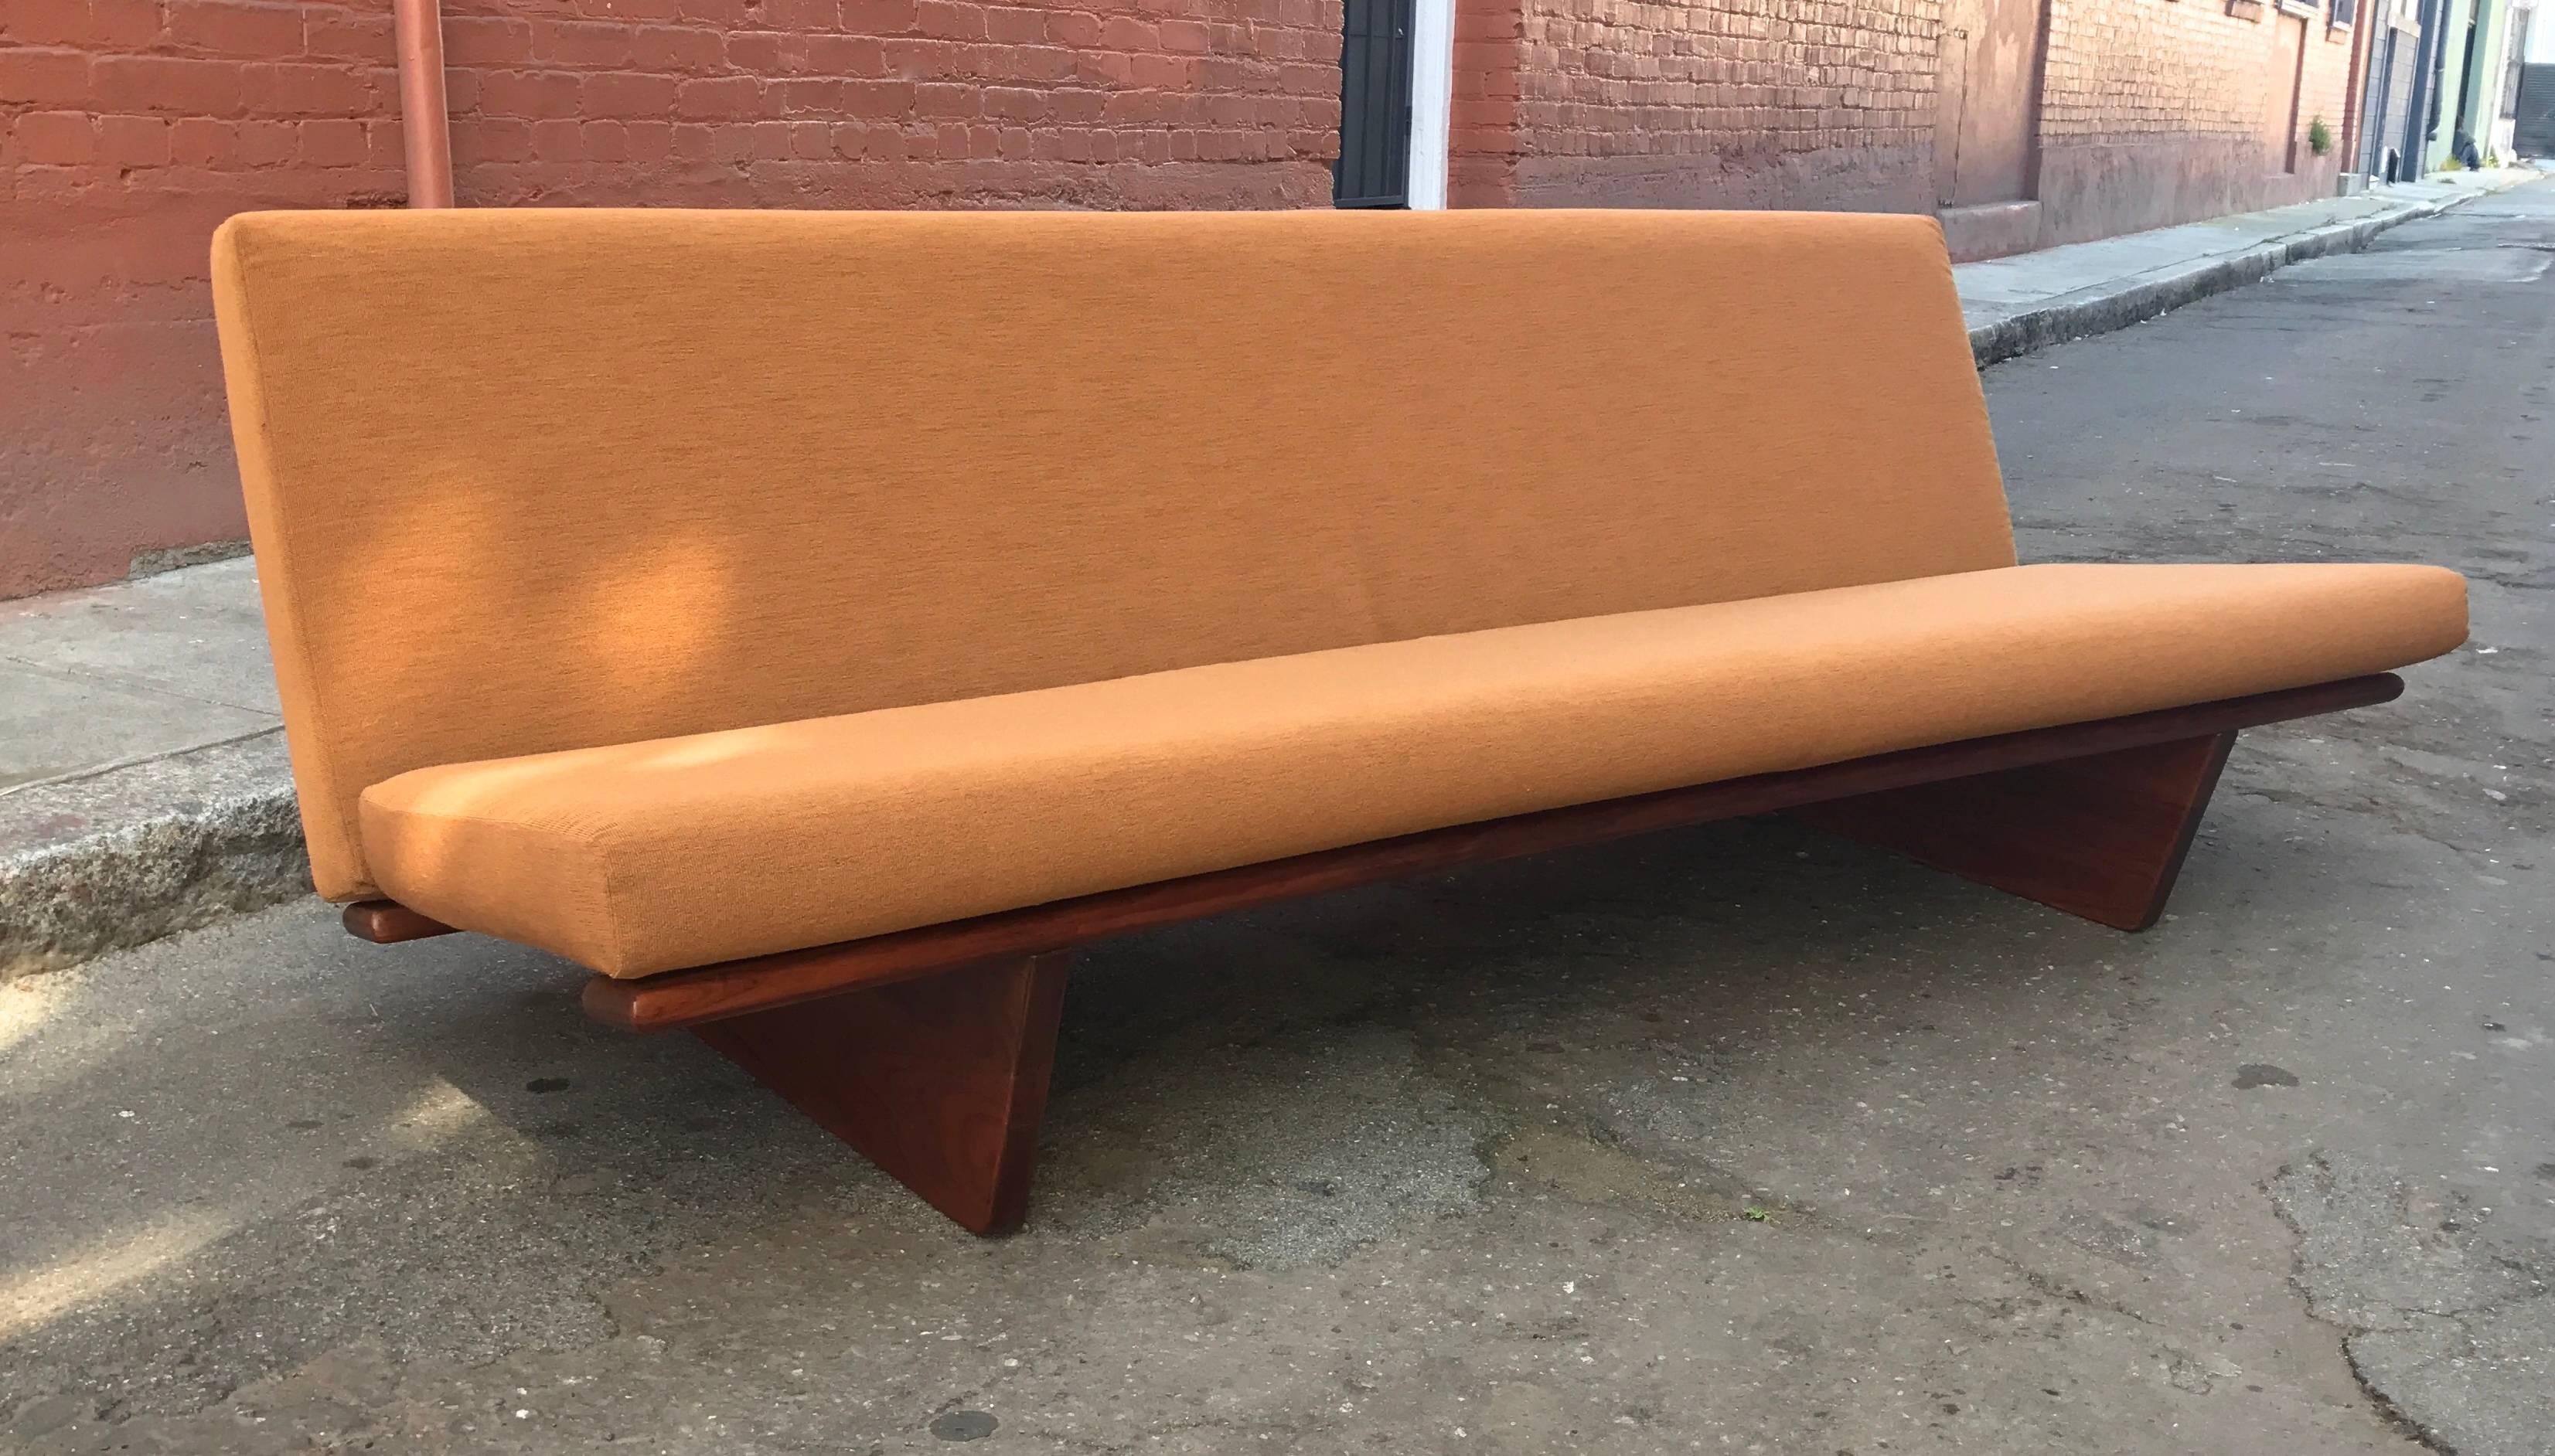 Early 1970s era conversion sofa into daybed from Denmark, this piece has undergone a complete restoration on every level, the solid African wood frame has been refinished and lacquered, new foam, upholstery and all new Pirelli webbing. Having